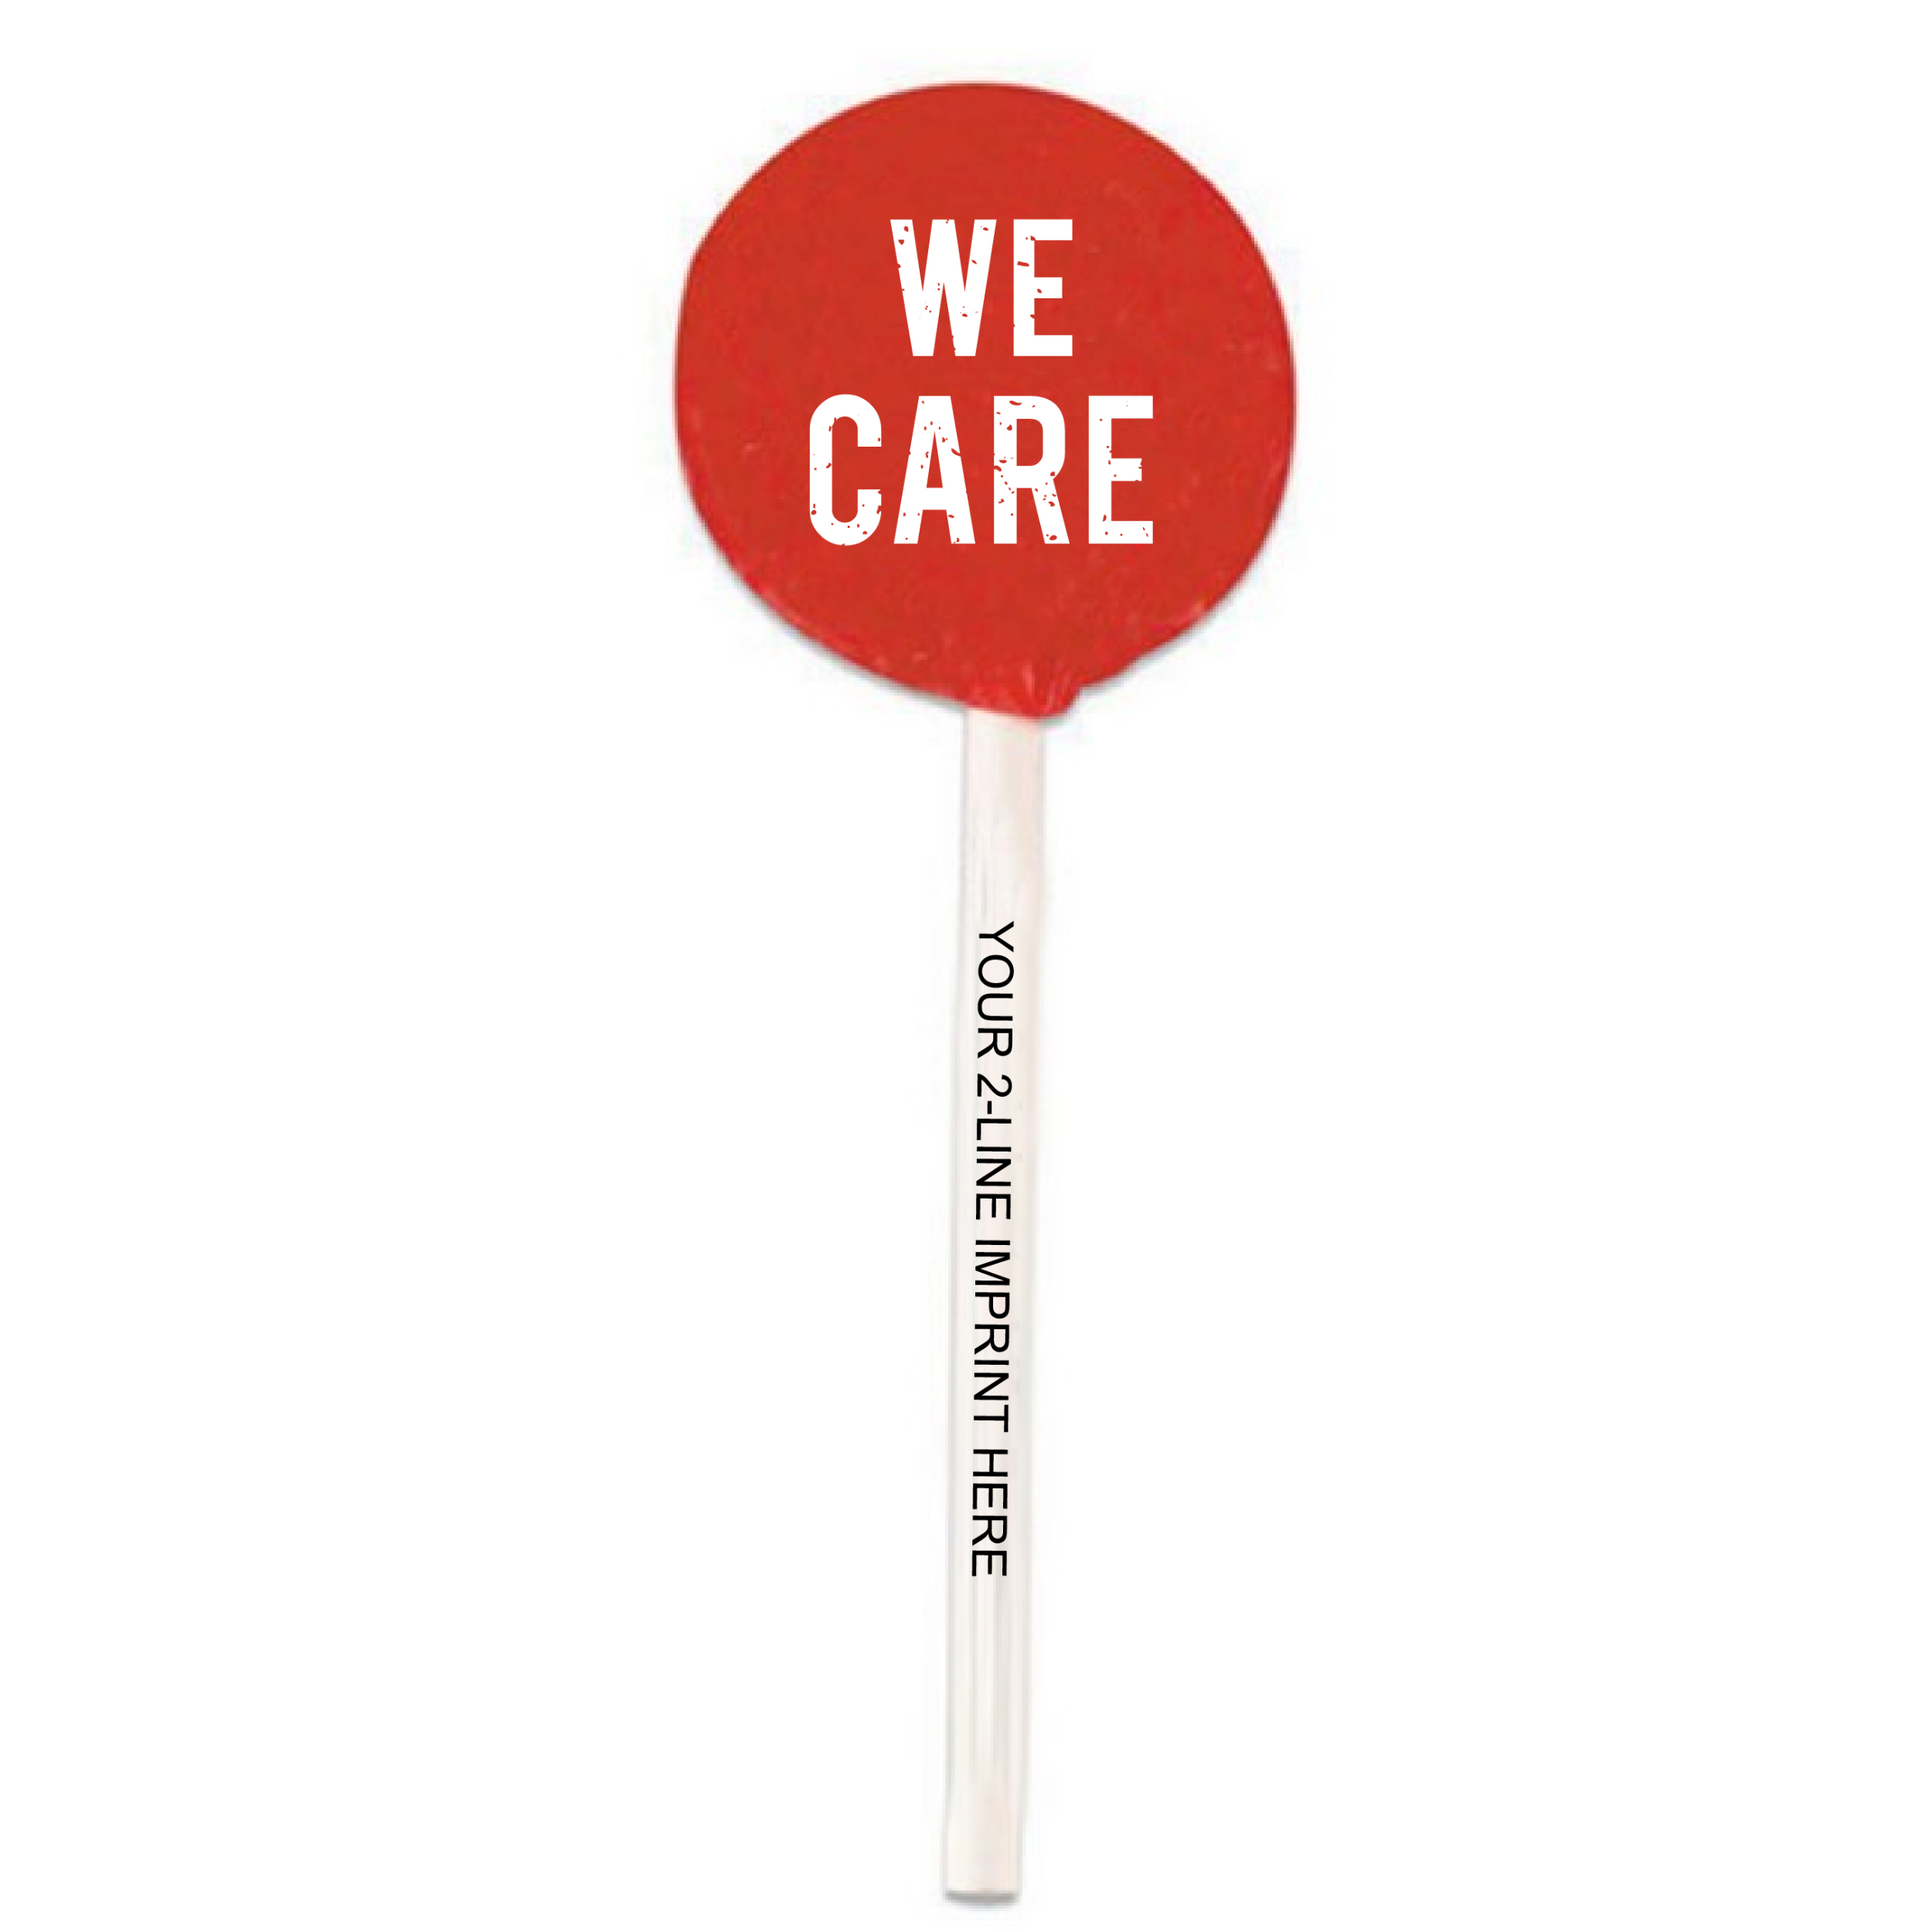 Personalized We Care Lollipops with Printed Stick at Celebration Candy